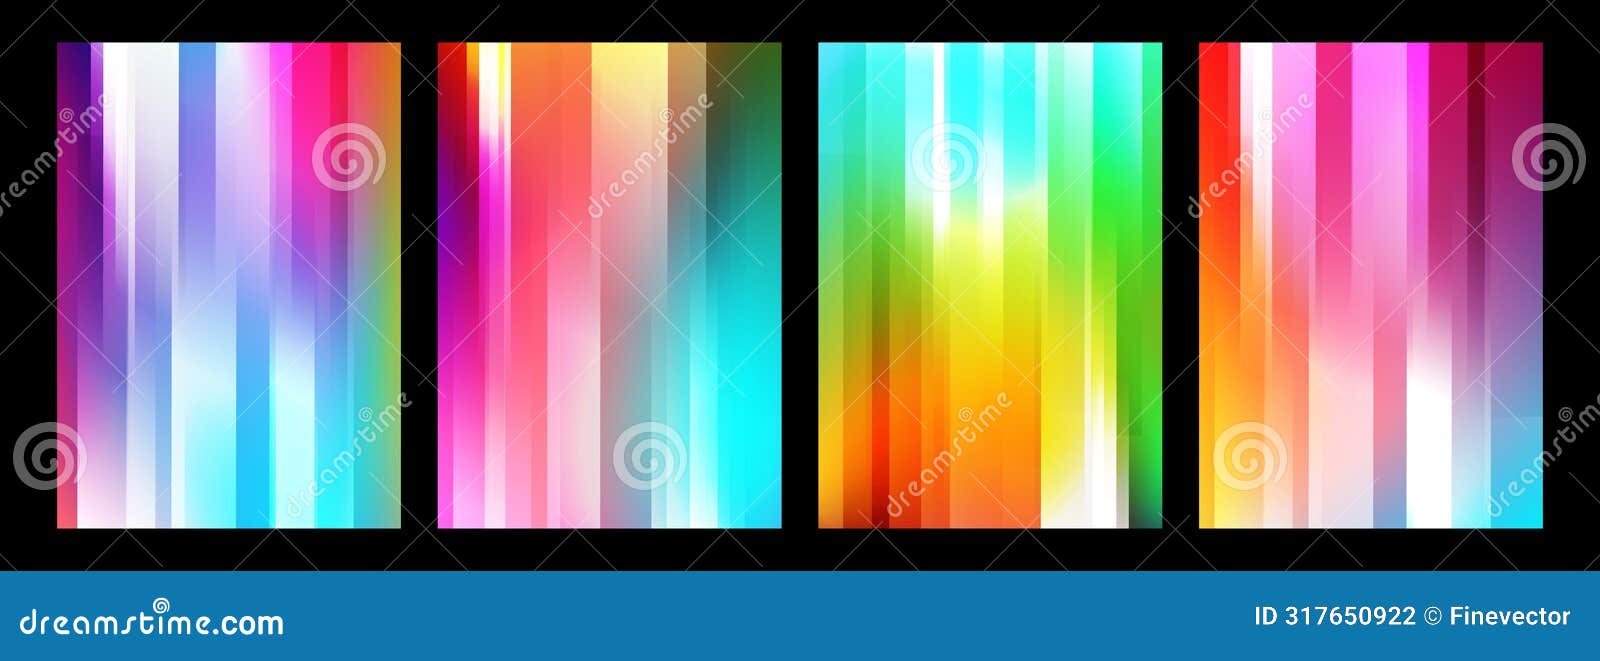 defocused bright colored abstract backgrounds with vertical dynamic lines.